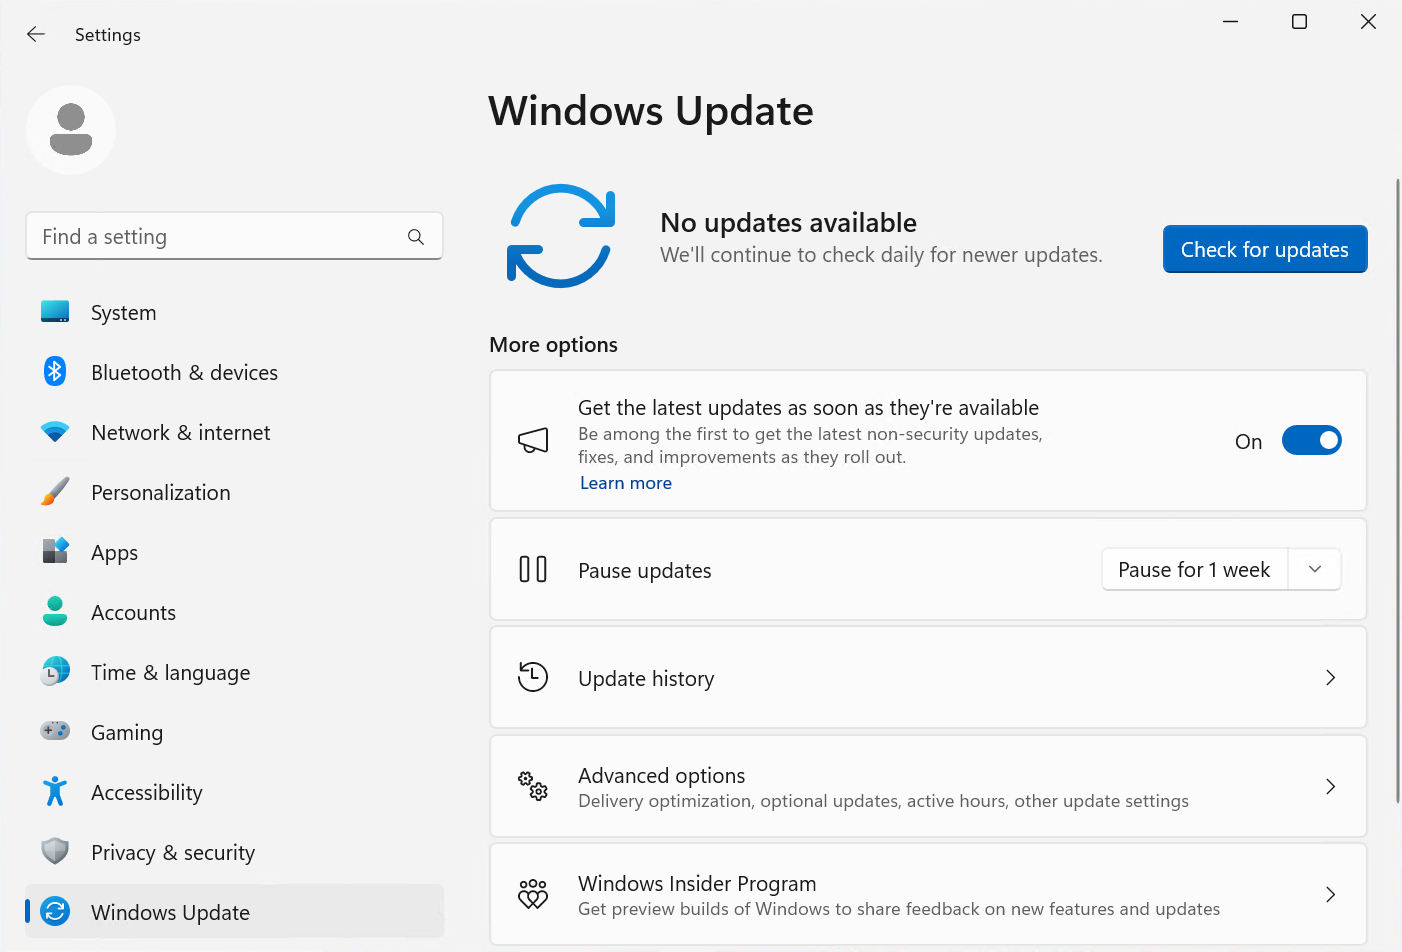 Windows Update FAQs page.